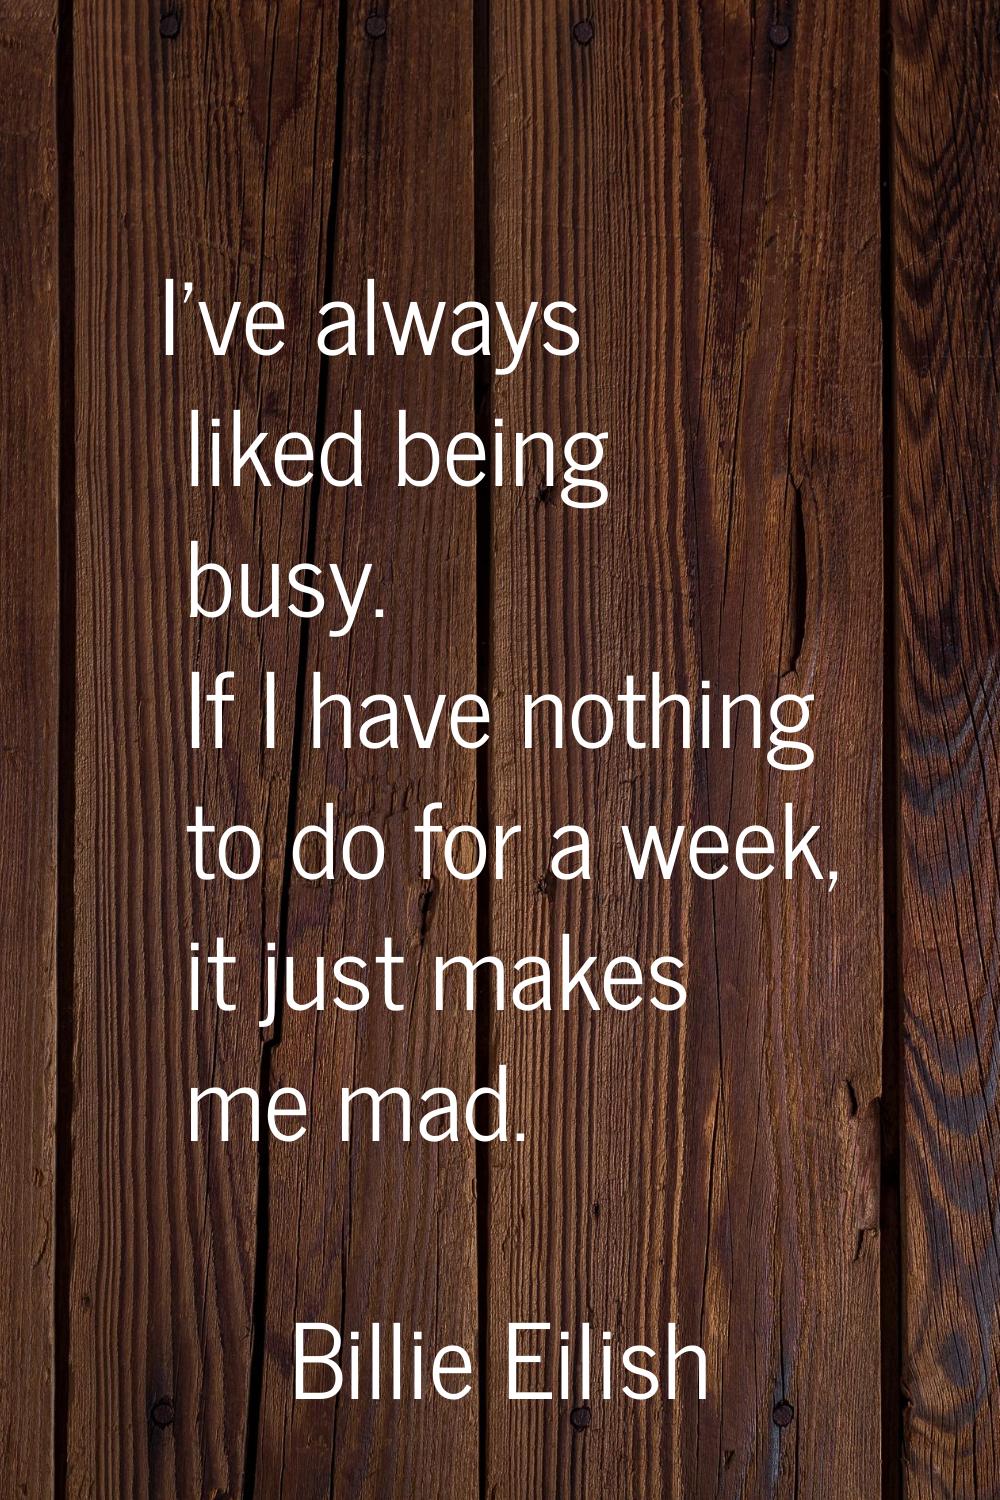 I've always liked being busy. If I have nothing to do for a week, it just makes me mad.